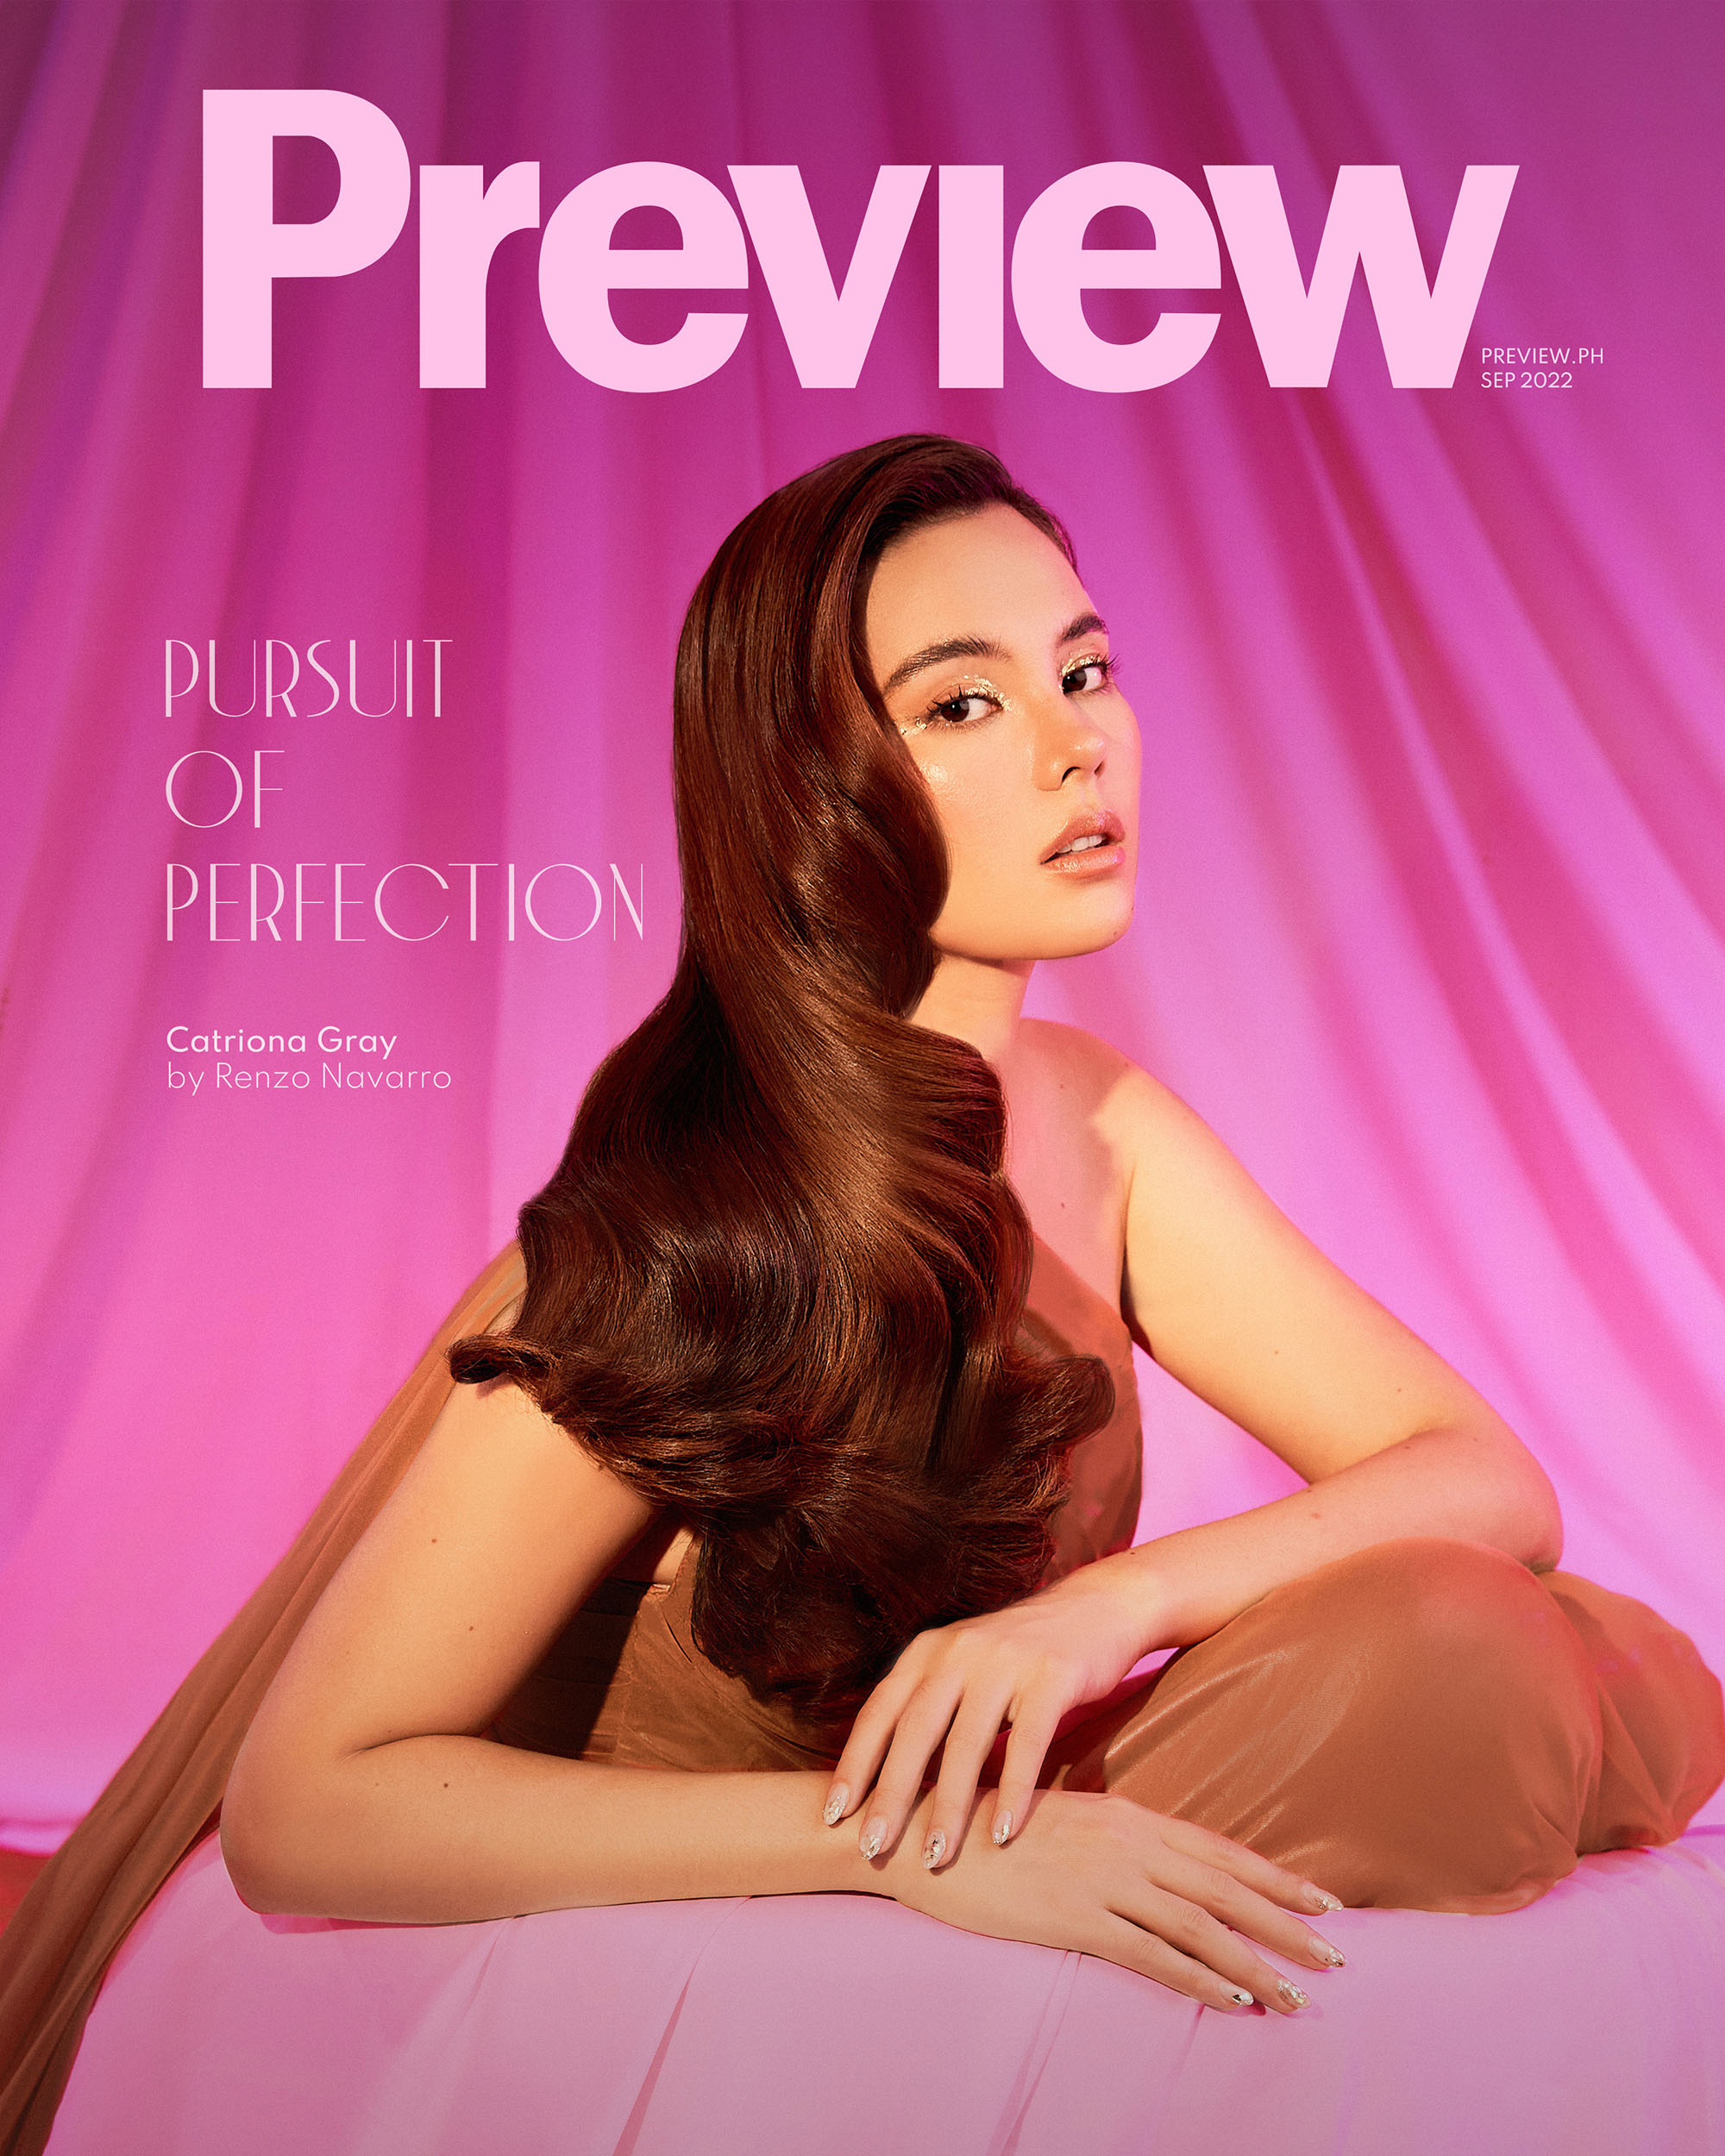 Catriona Gray’s Pursuit Of Perfection | Preview.ph